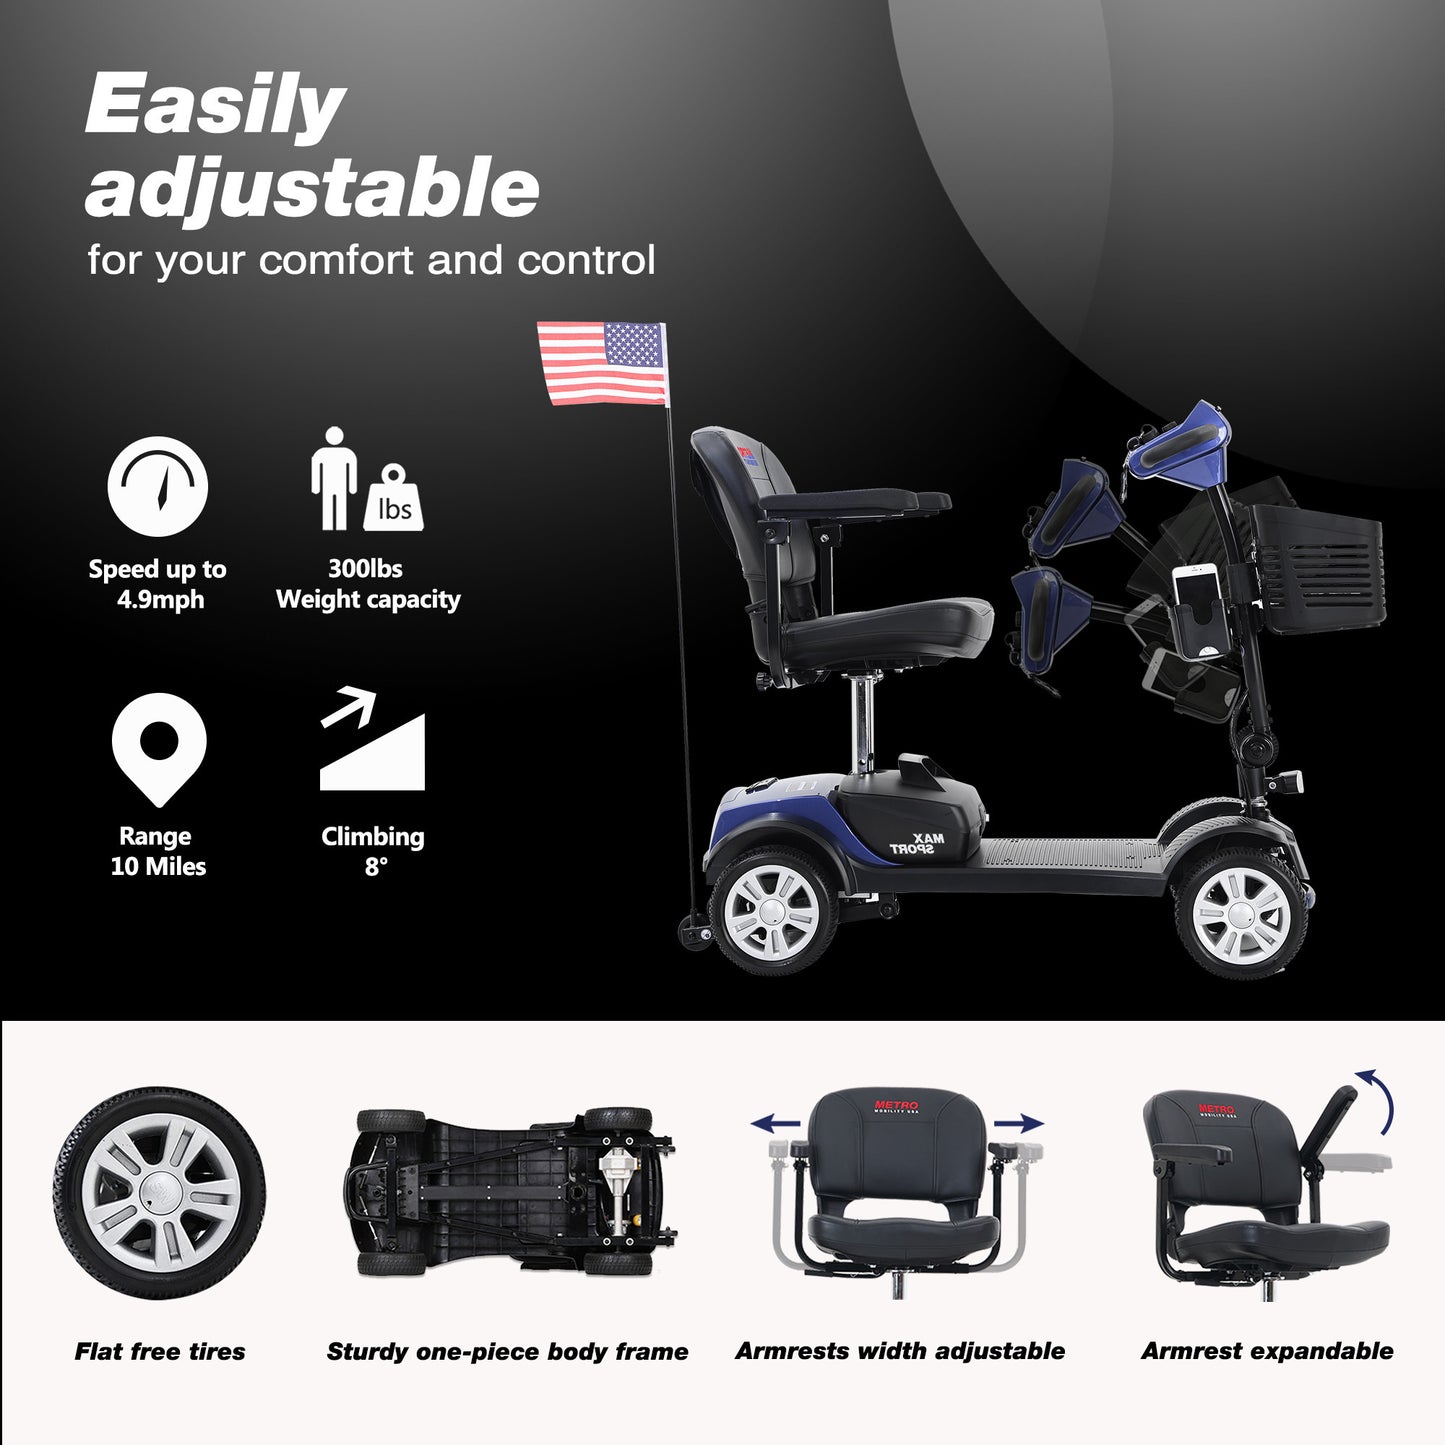 MAX SPORT BLUE 4 Wheels Outdoor Compact Mobility Scooter with 2 in 1 Cup & Phone Holder